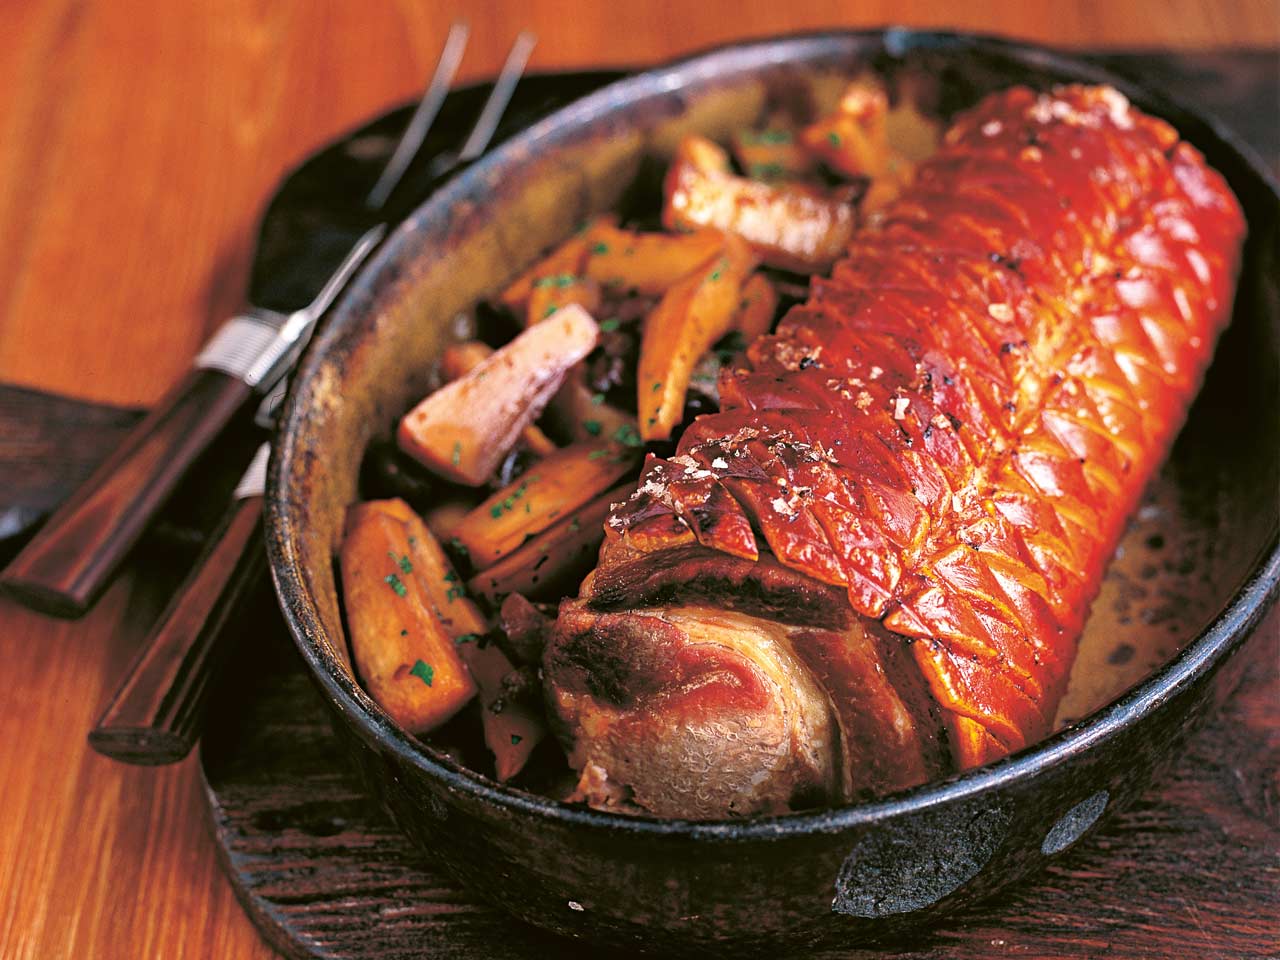 James Martin's pork loin with sherry-roasted parsnips and chestnuts